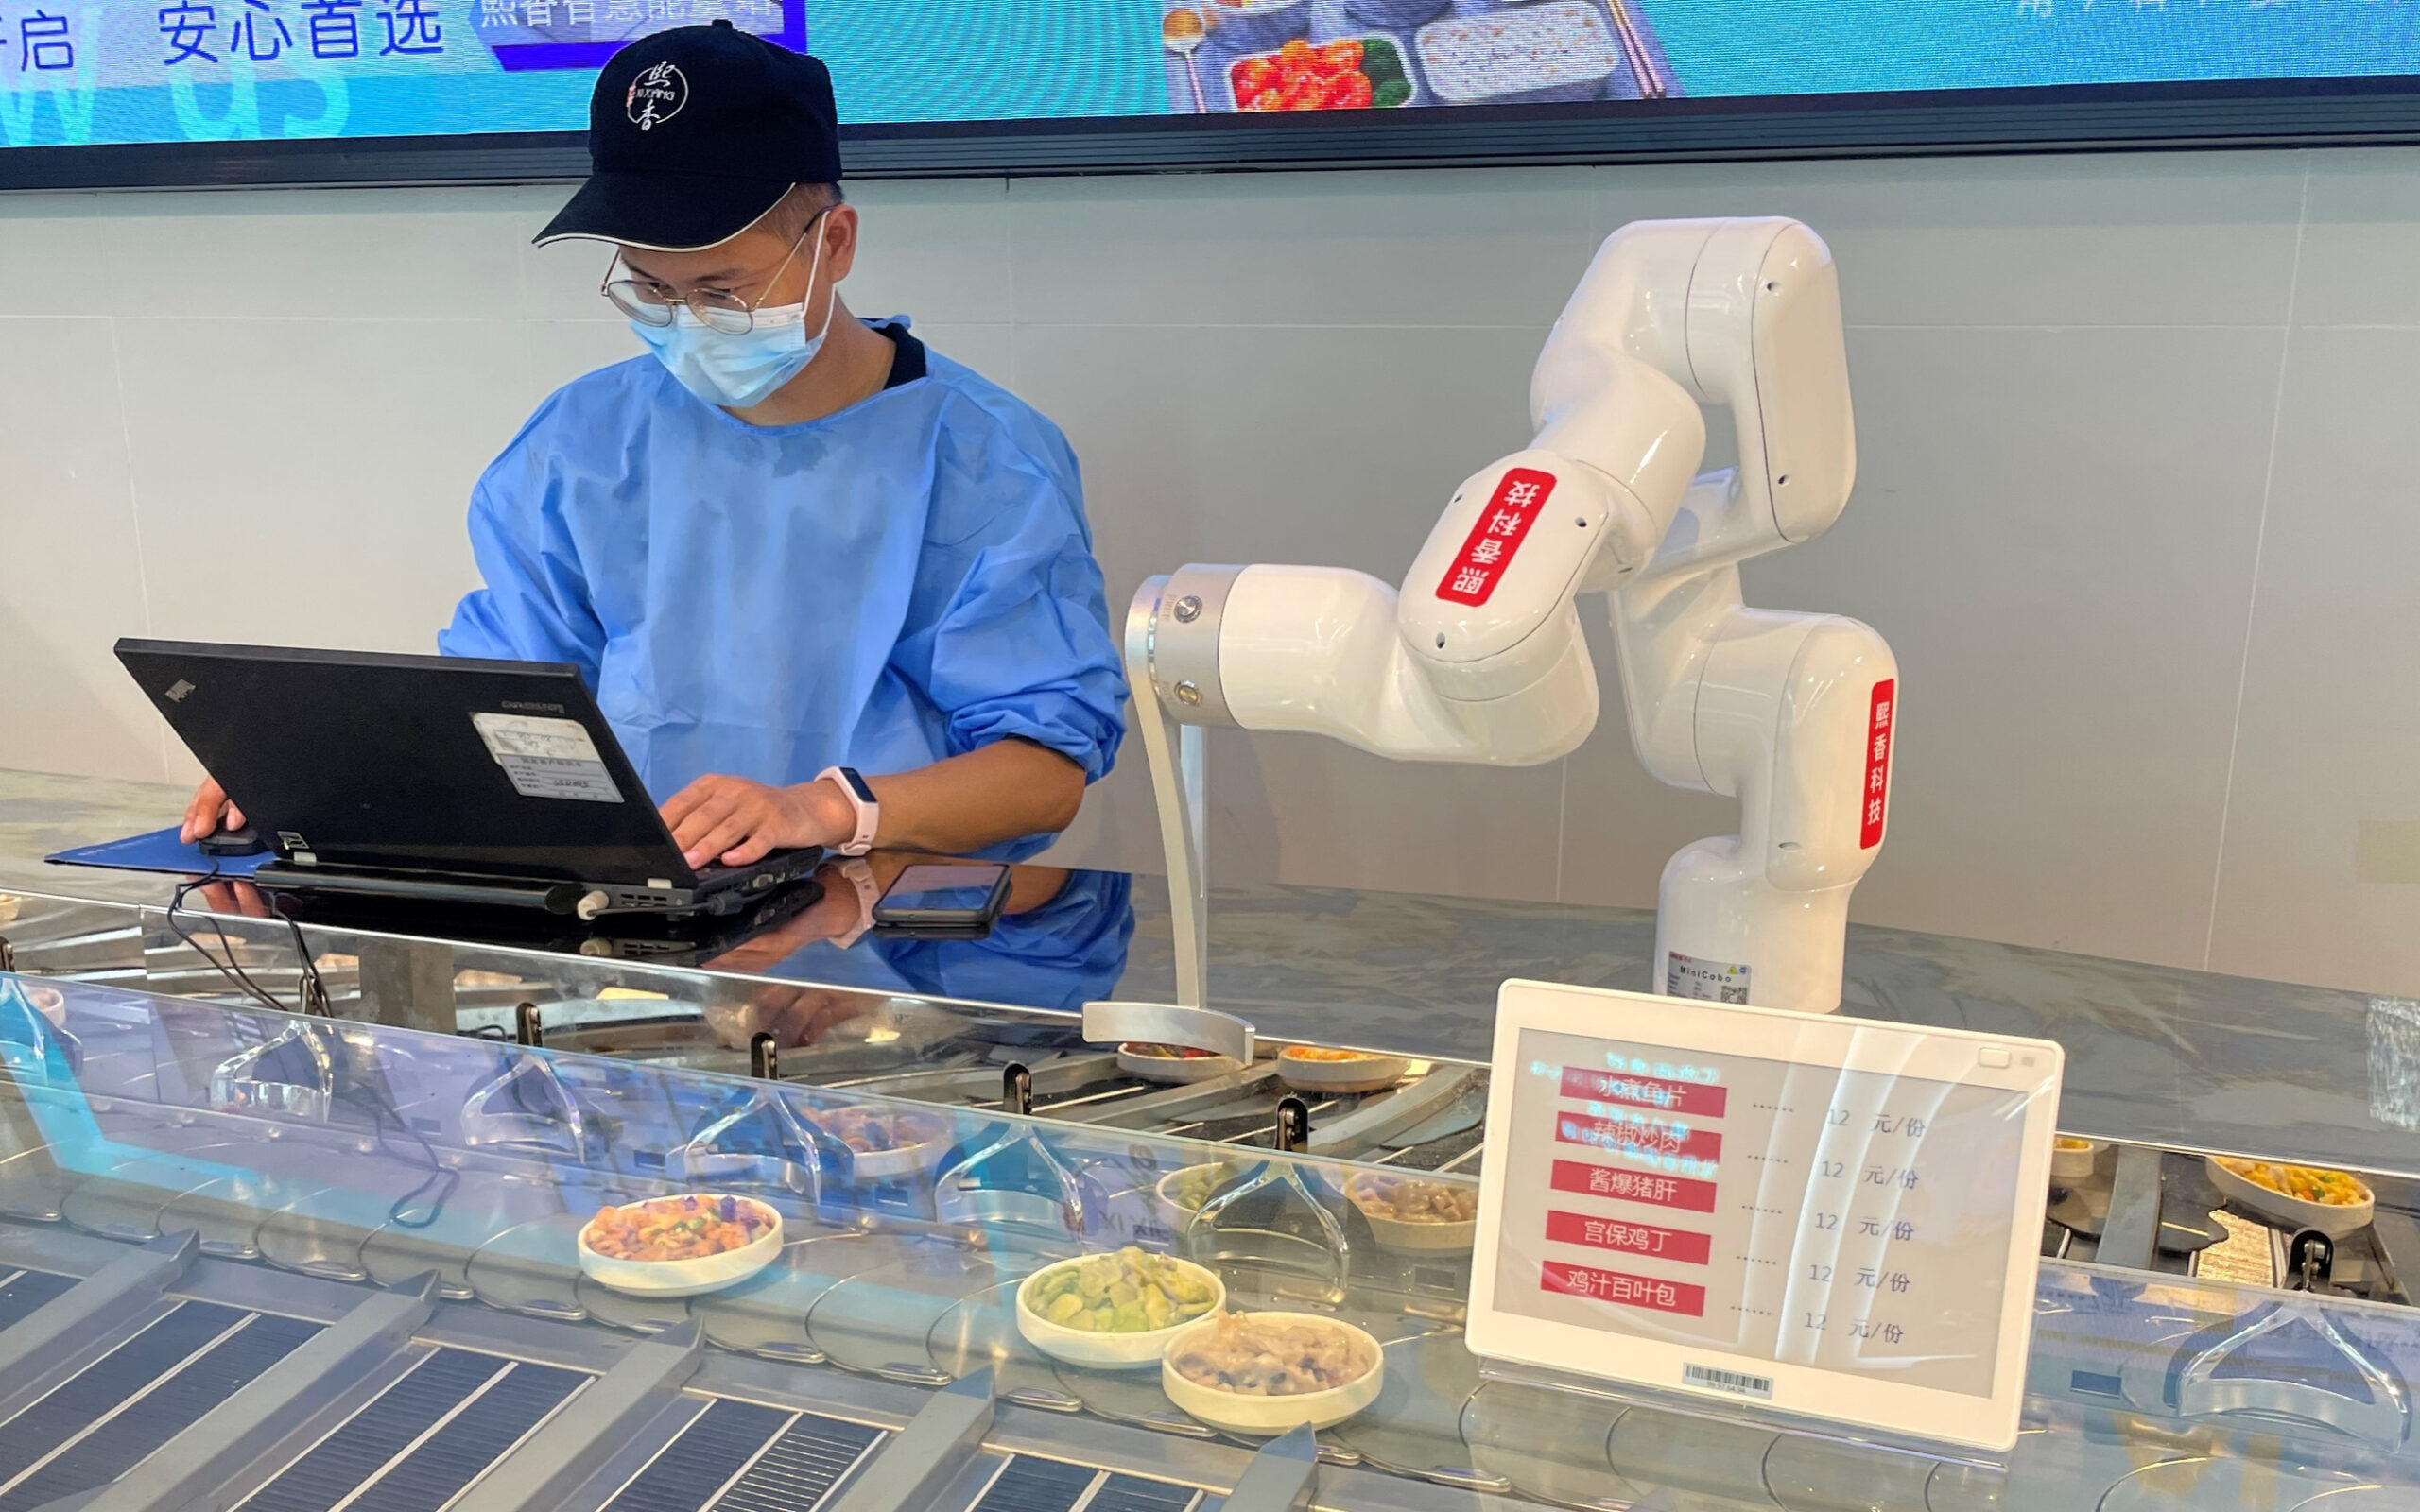 Food Service Automation in China